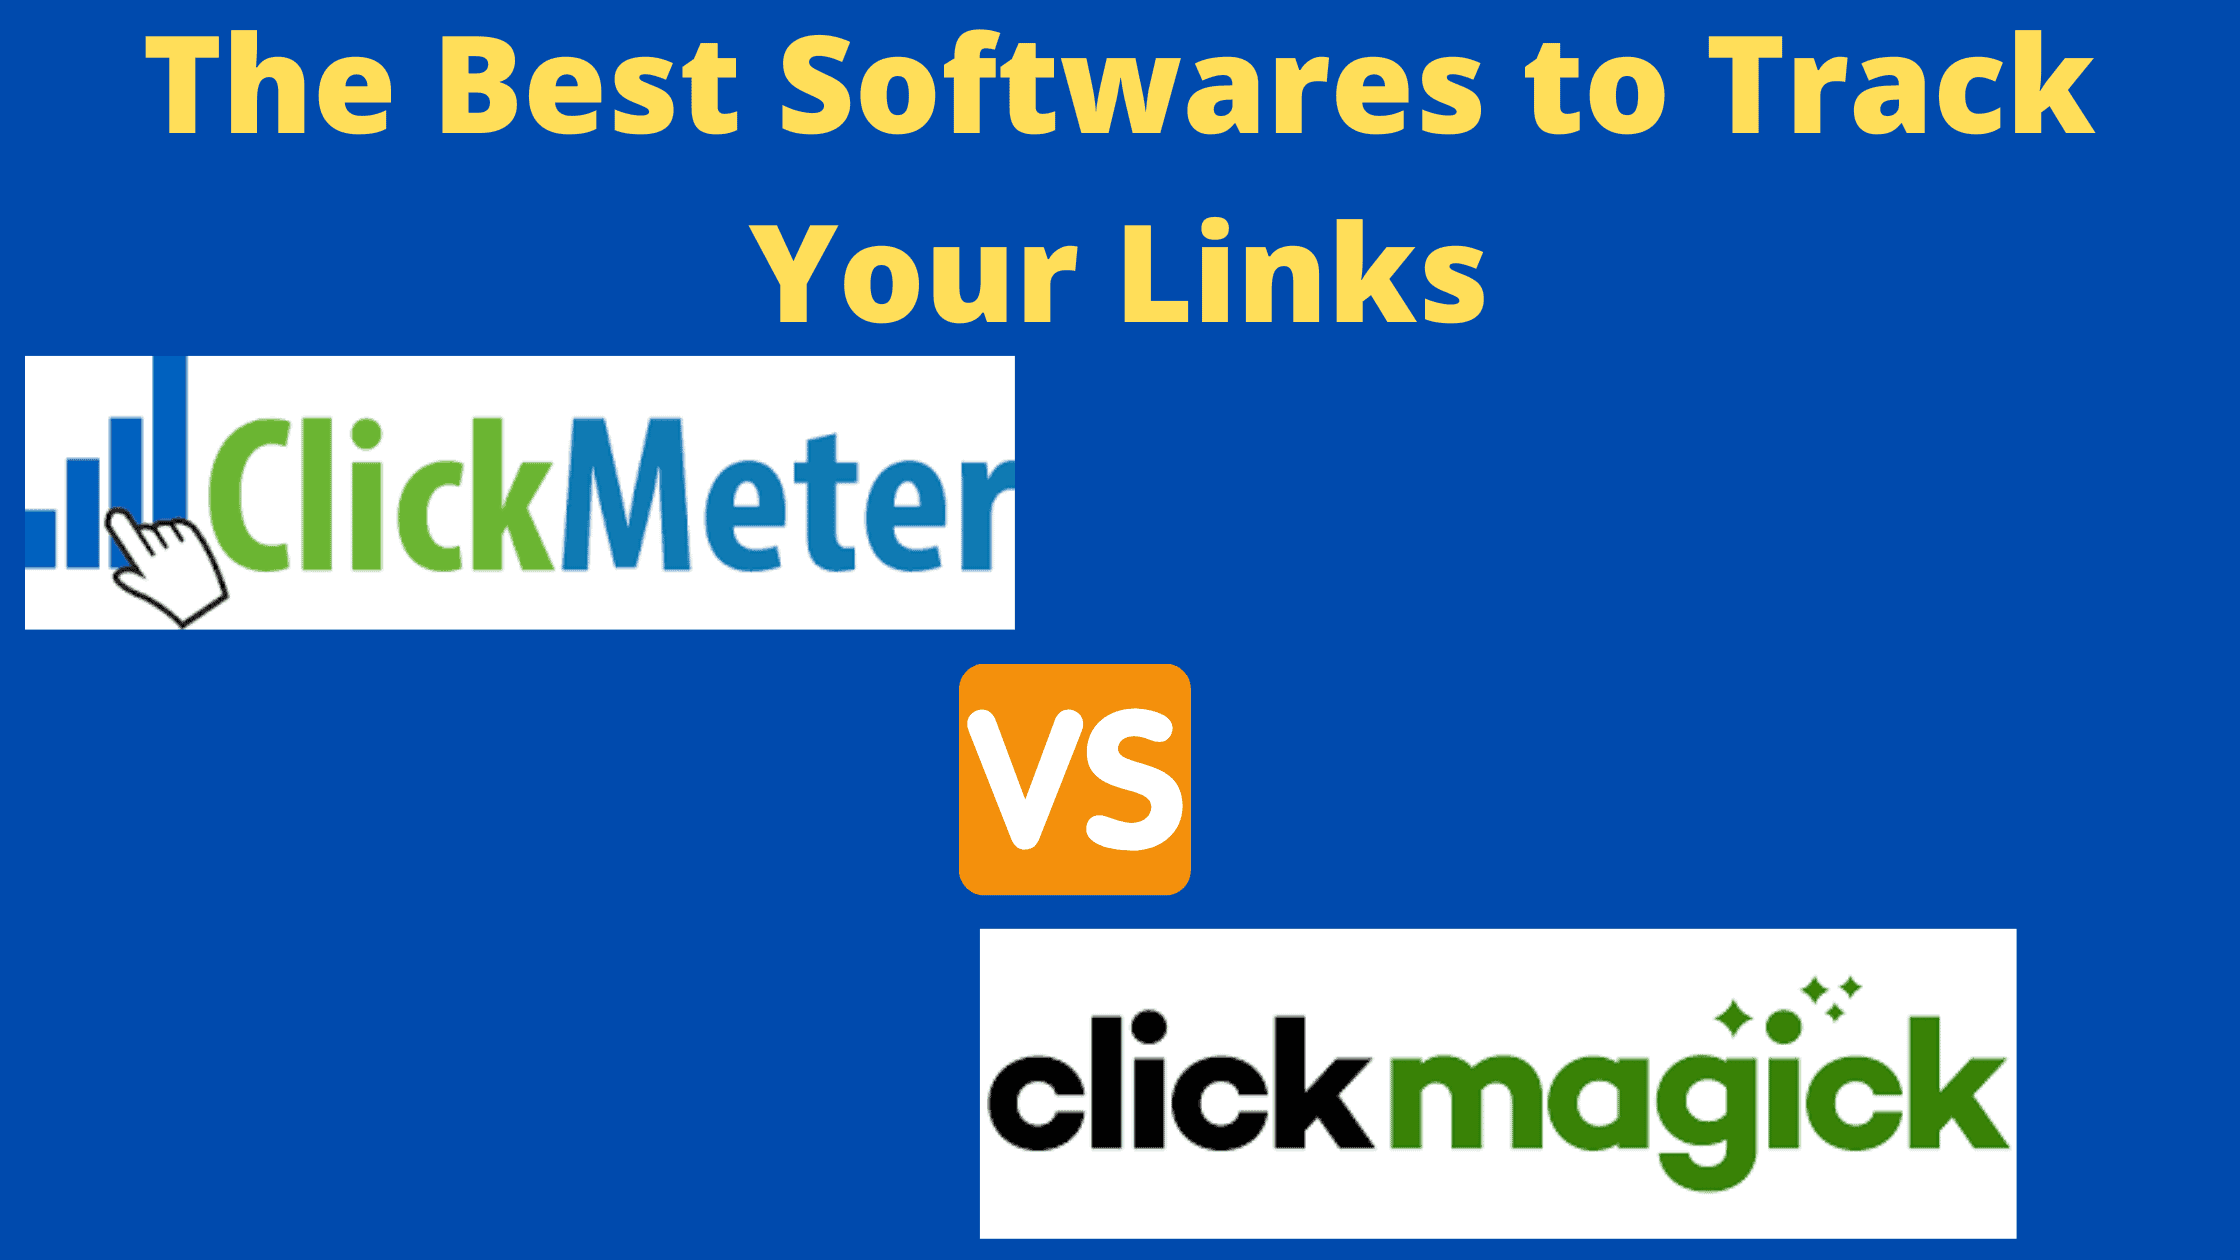 ClickMeter Vs. ClickMagick, The Best Software to Track Your Links